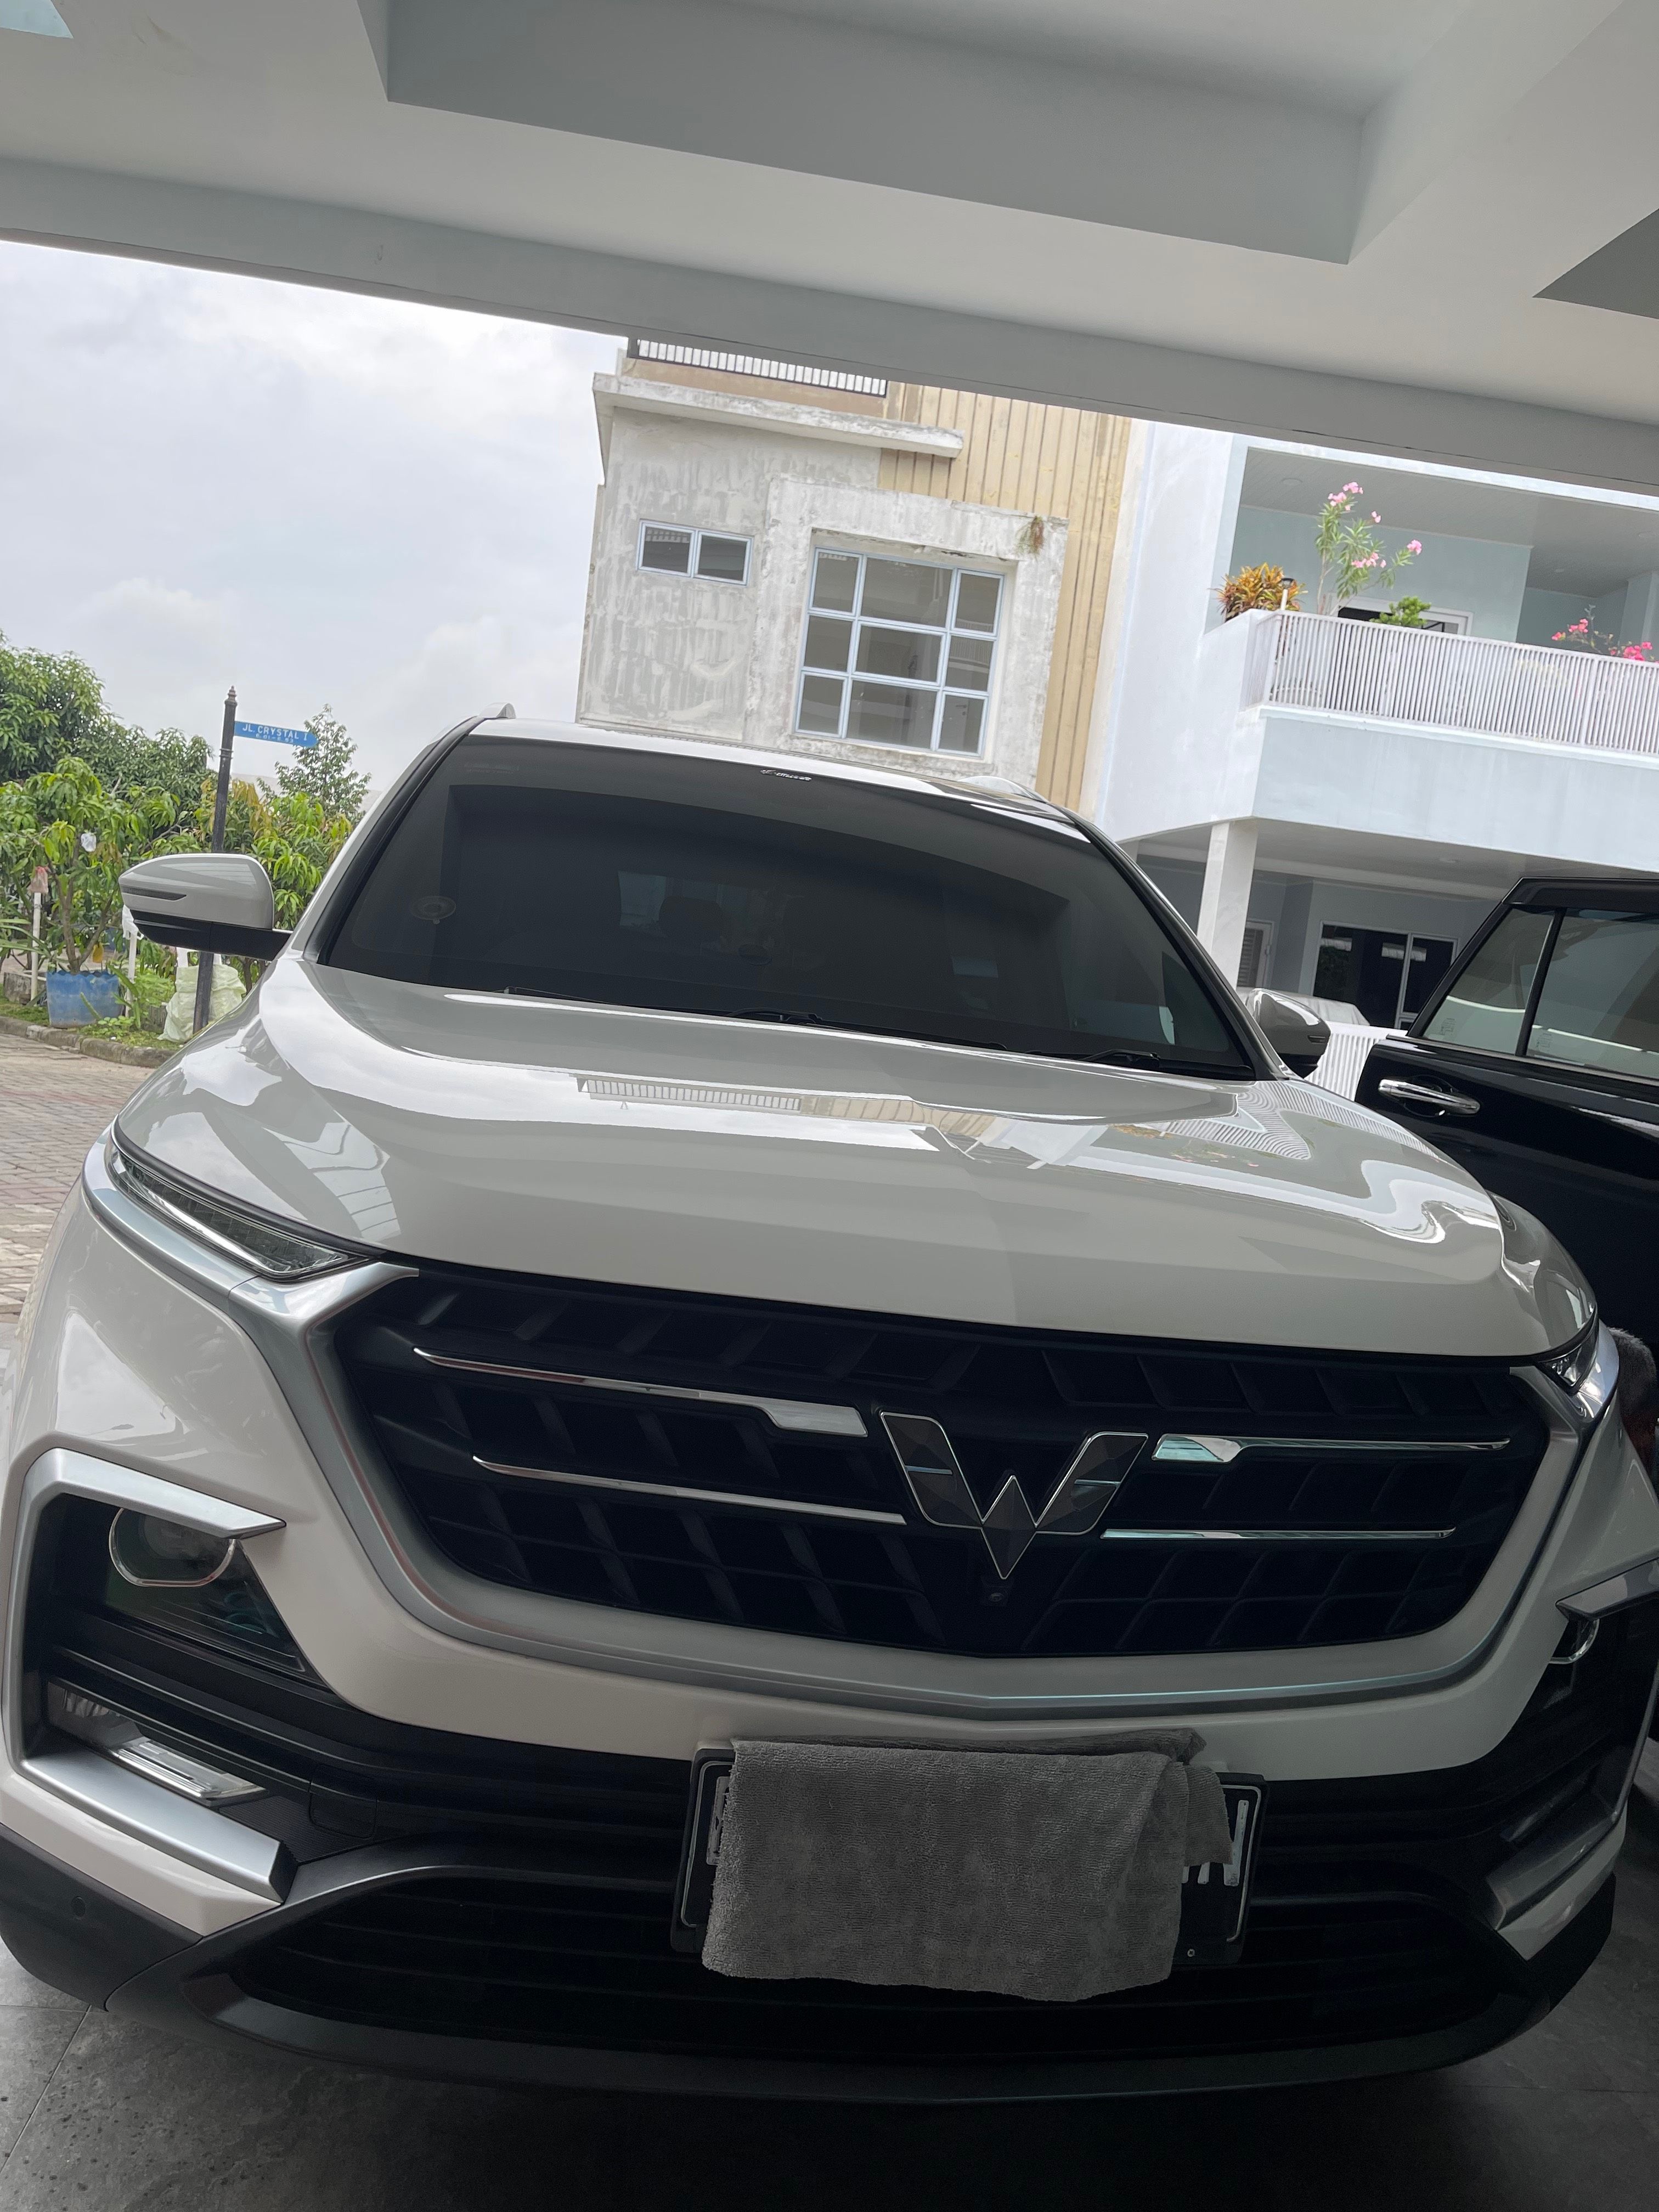 2019 Wuling Almaz 1.5 TURBO LUX AT 1.5 TURBO LUX AT bekas